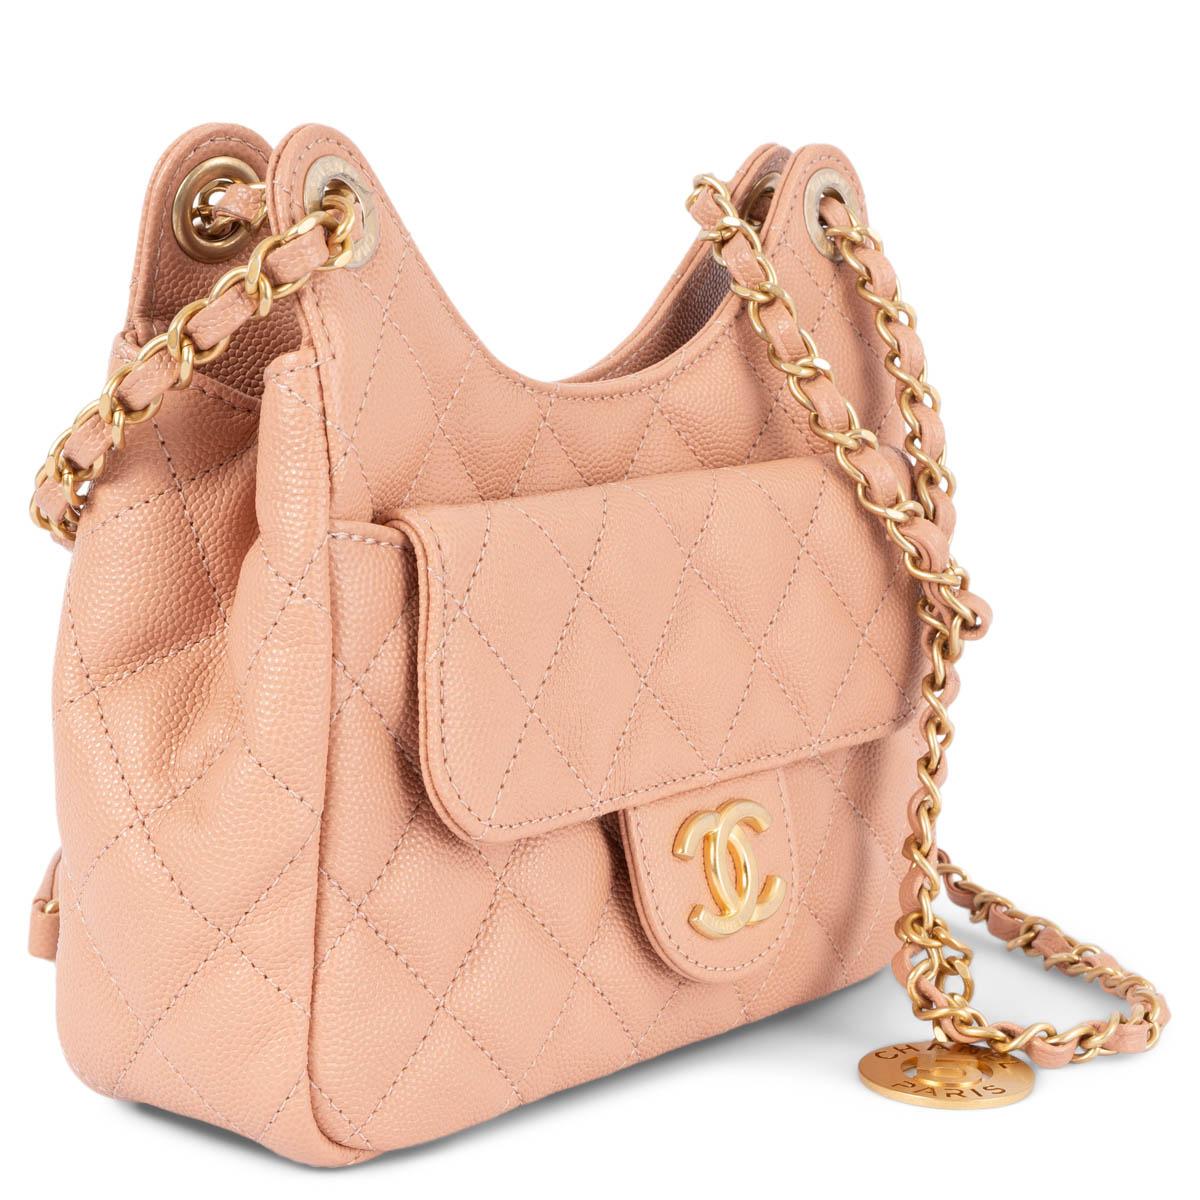 100% authentic Chanel Wavy Hobo Small shoulder bag in beige-peach Caviar leather. Features a front flap pocket with magnetic snap, an open back pocket, light gold-tone hardware. Lined in beige grosgrain fabric with an open pocket against the back.